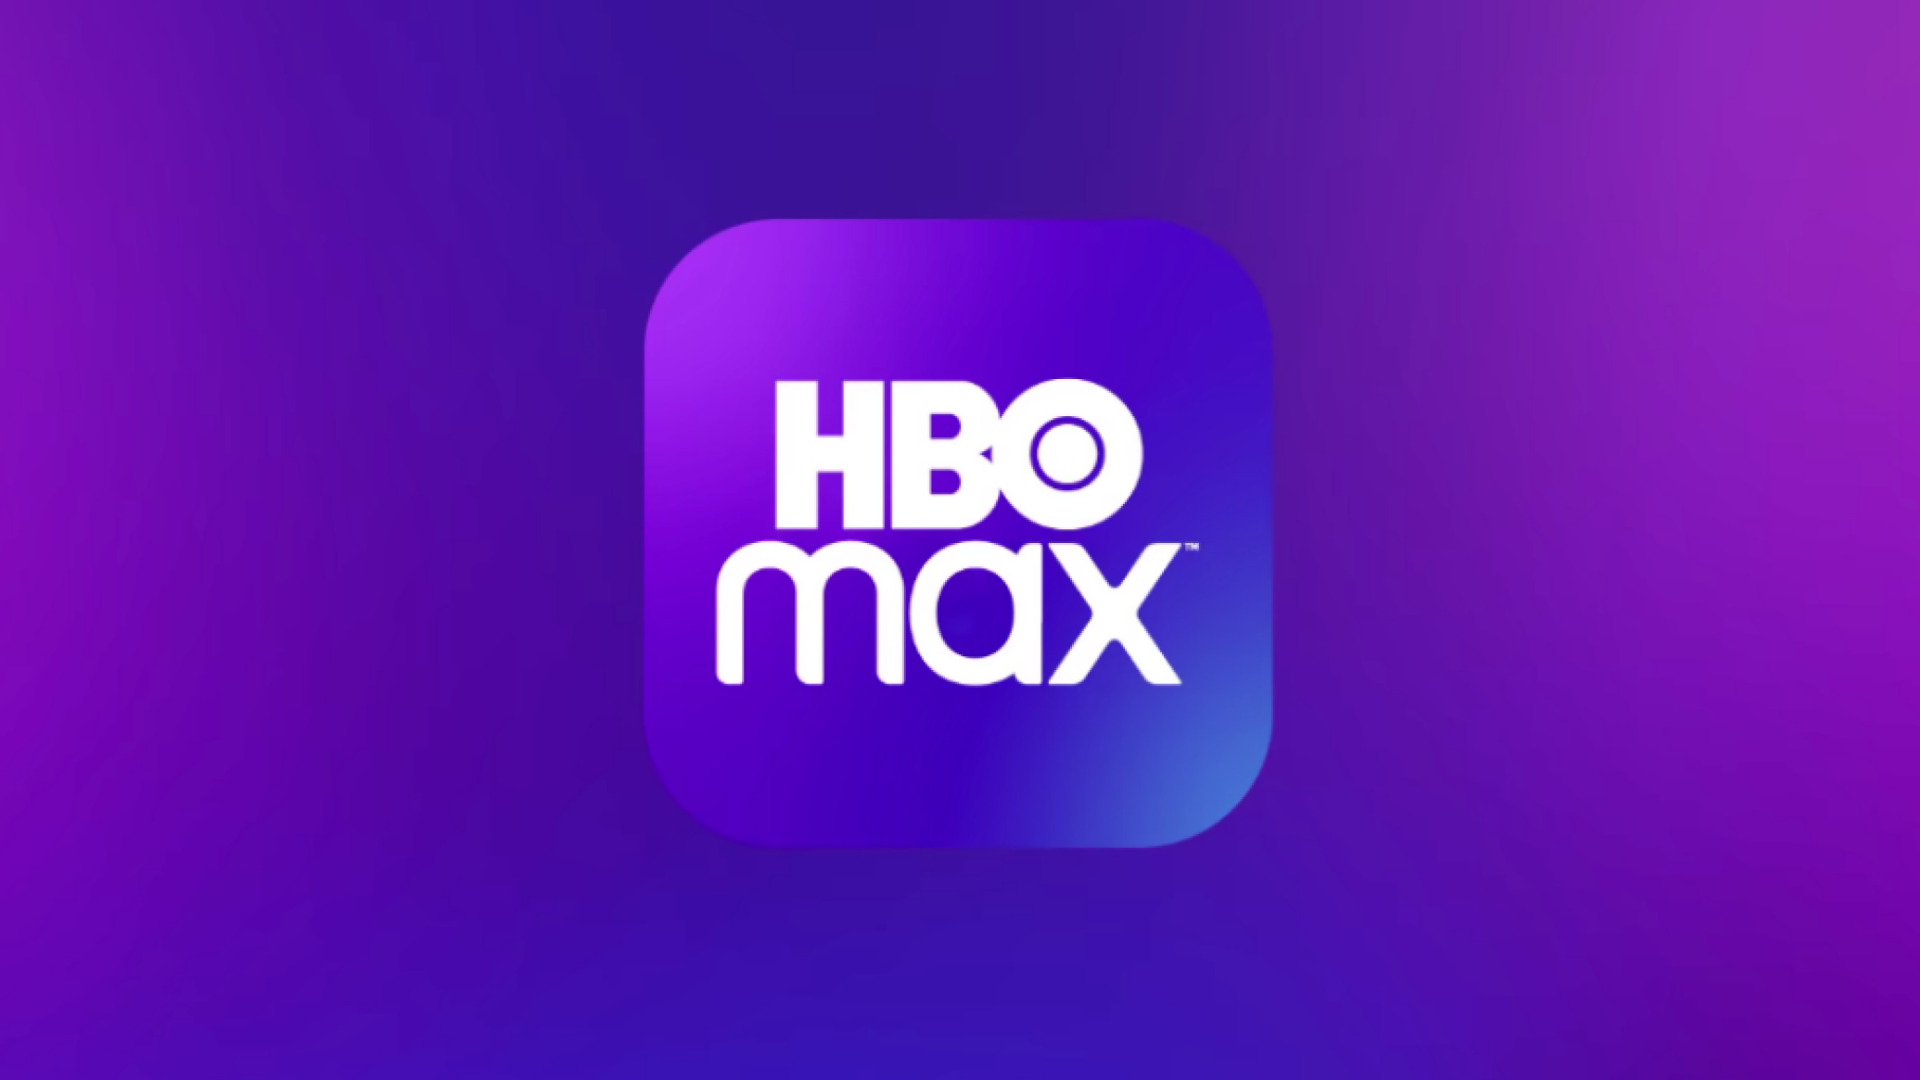 HBO Max launches today & other top news